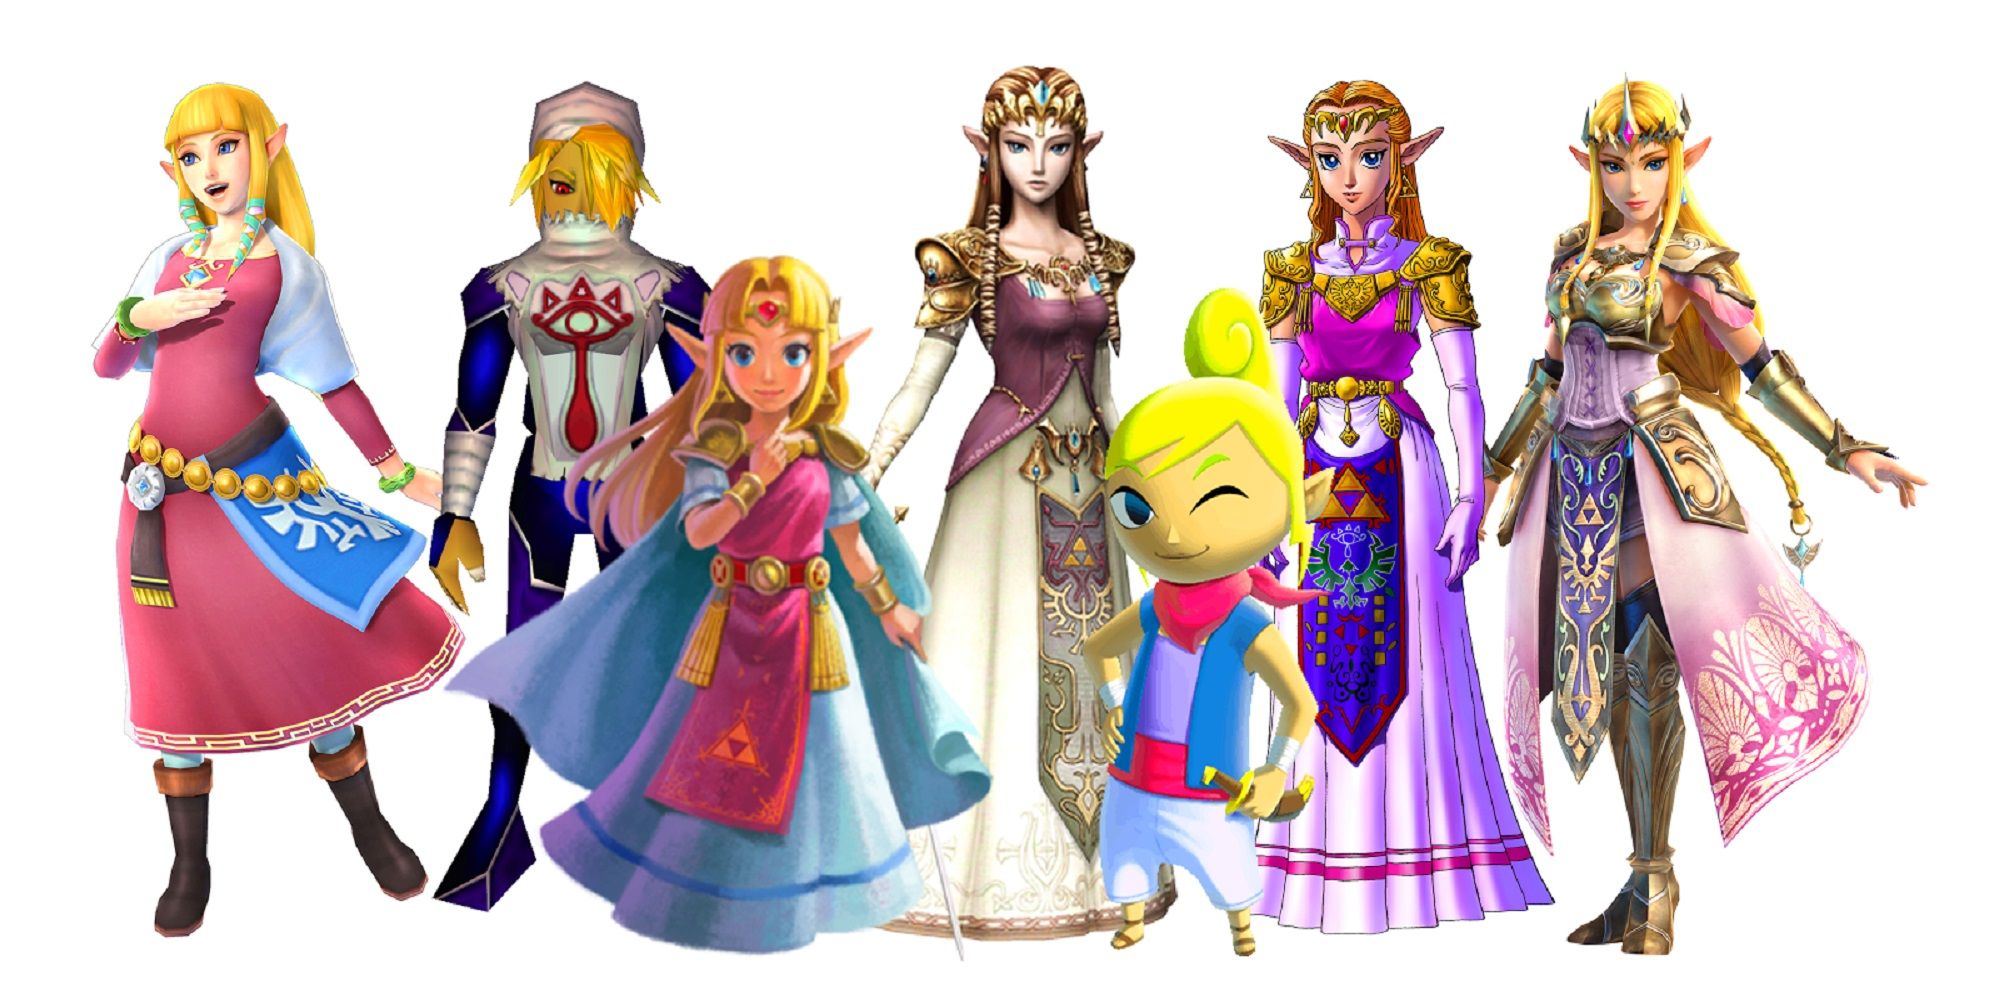 Zelda throughout the generations